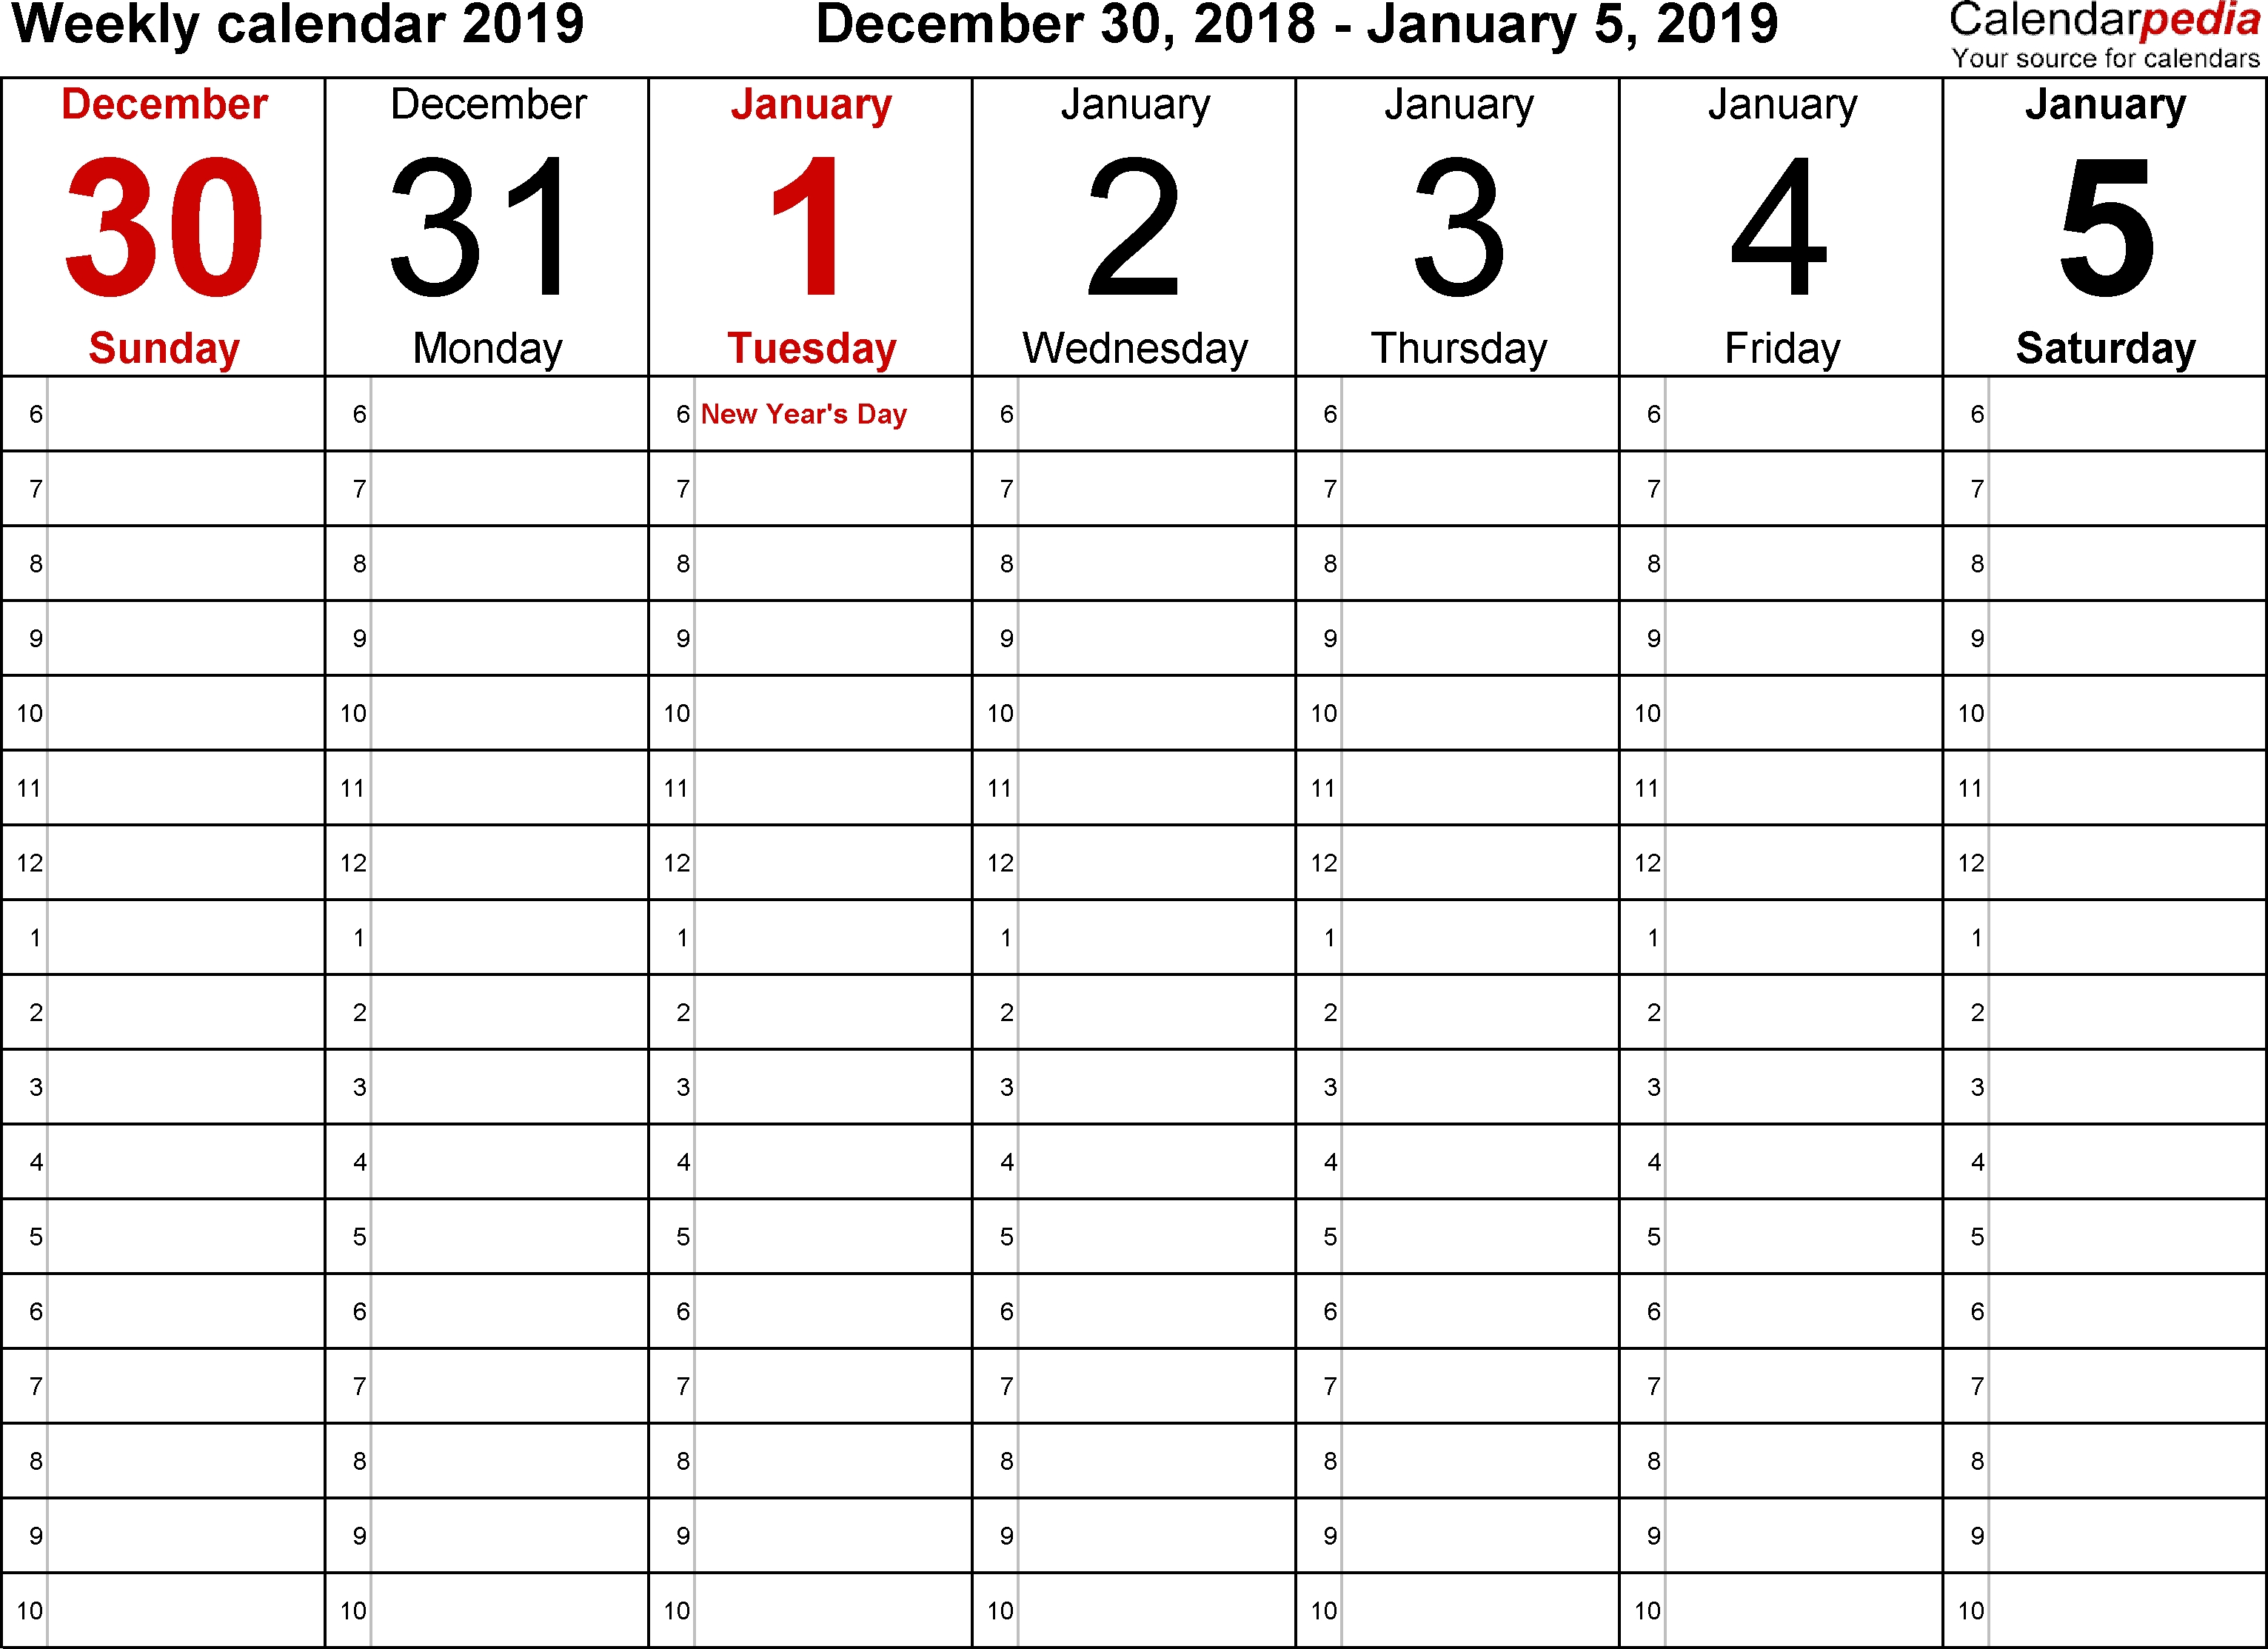 Weekly Calendar 2019 For Word - 12 Free Printable Templates pertaining to Blank Weekly Calendar Print Outs